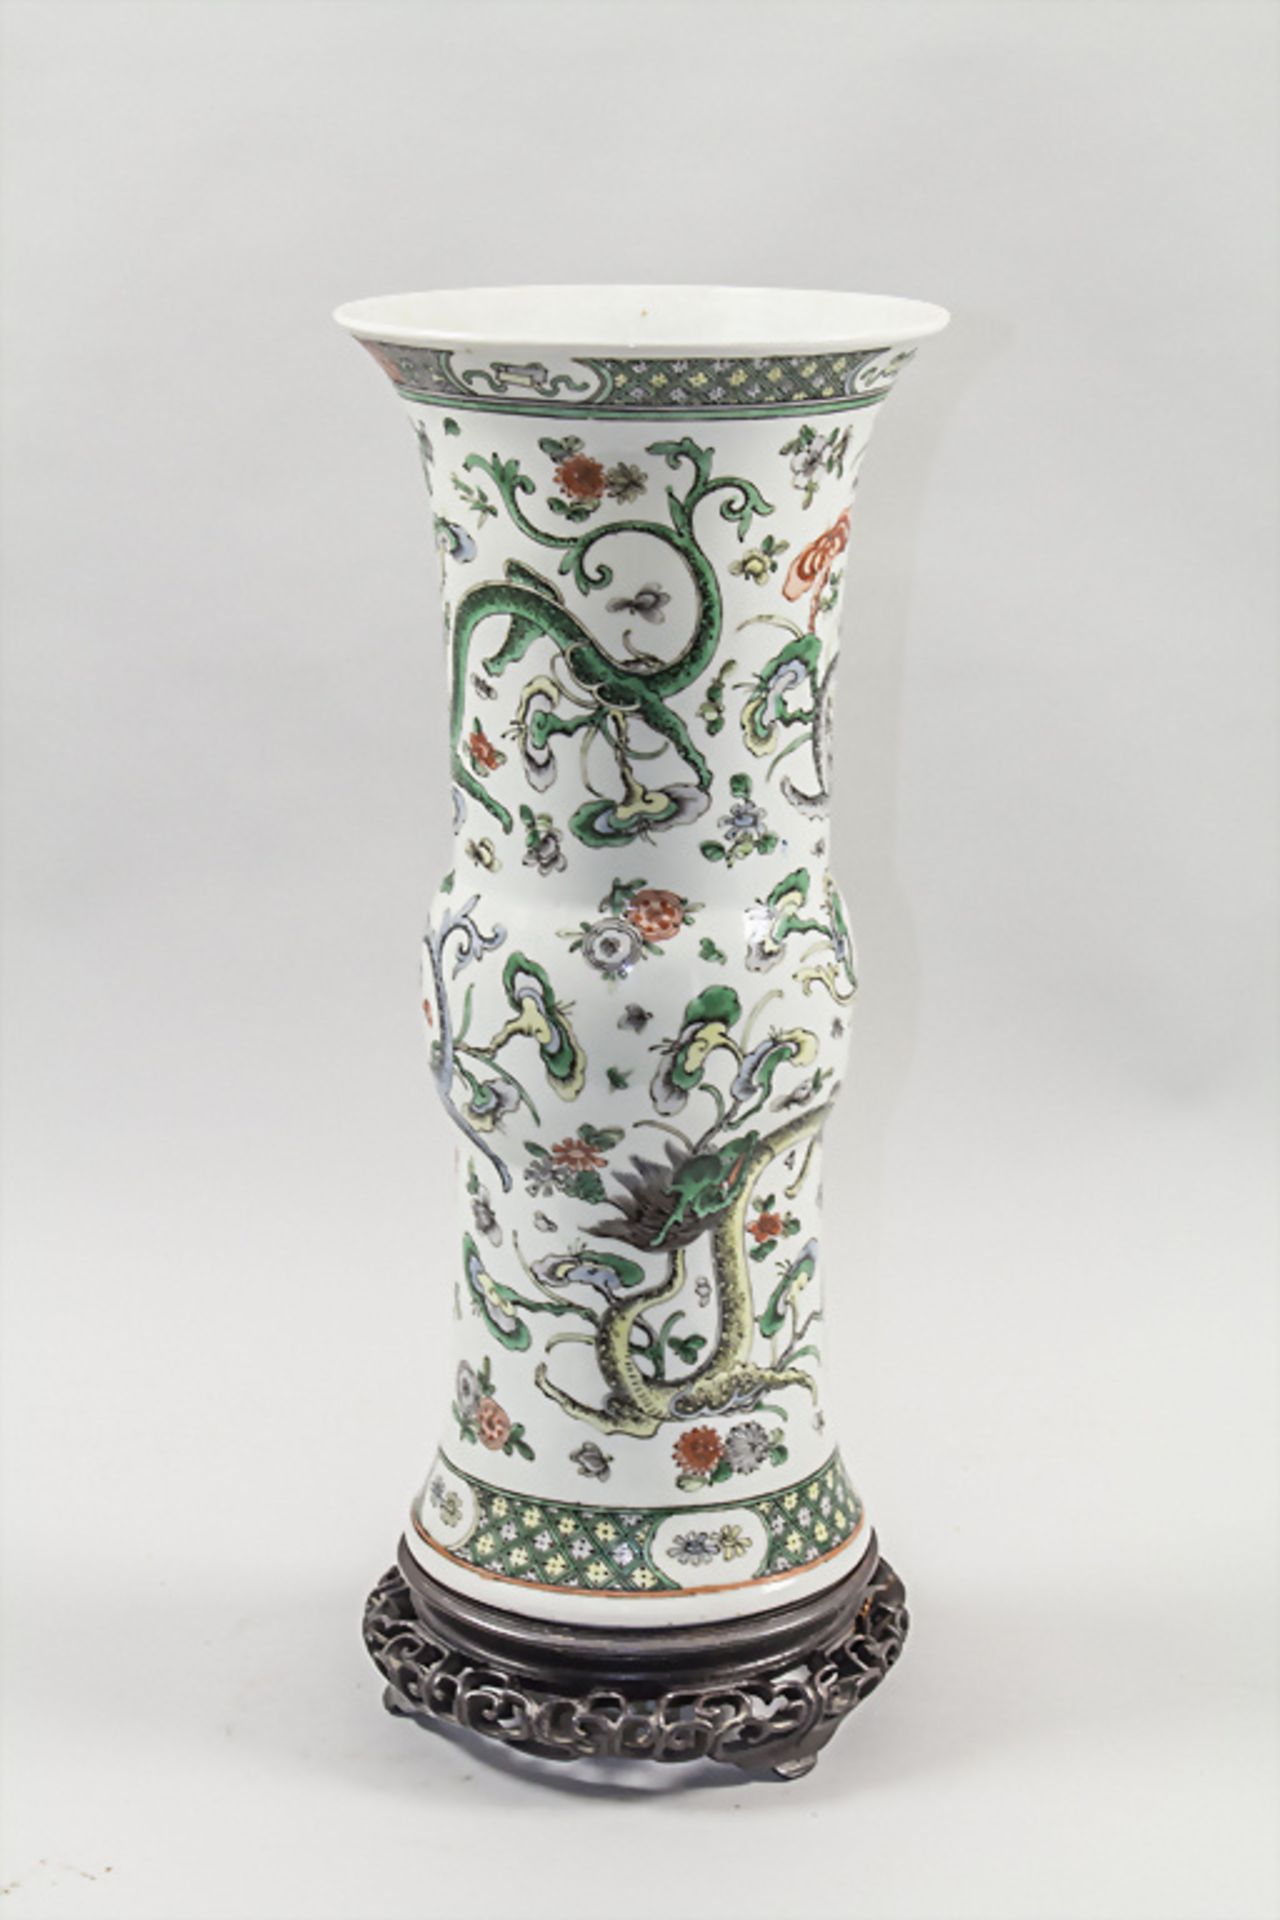 Vase mit Holzstand / A vase with wooden stand, China, Qing-Dynastie (1644-1911), 18./19. Jh. - Image 4 of 7